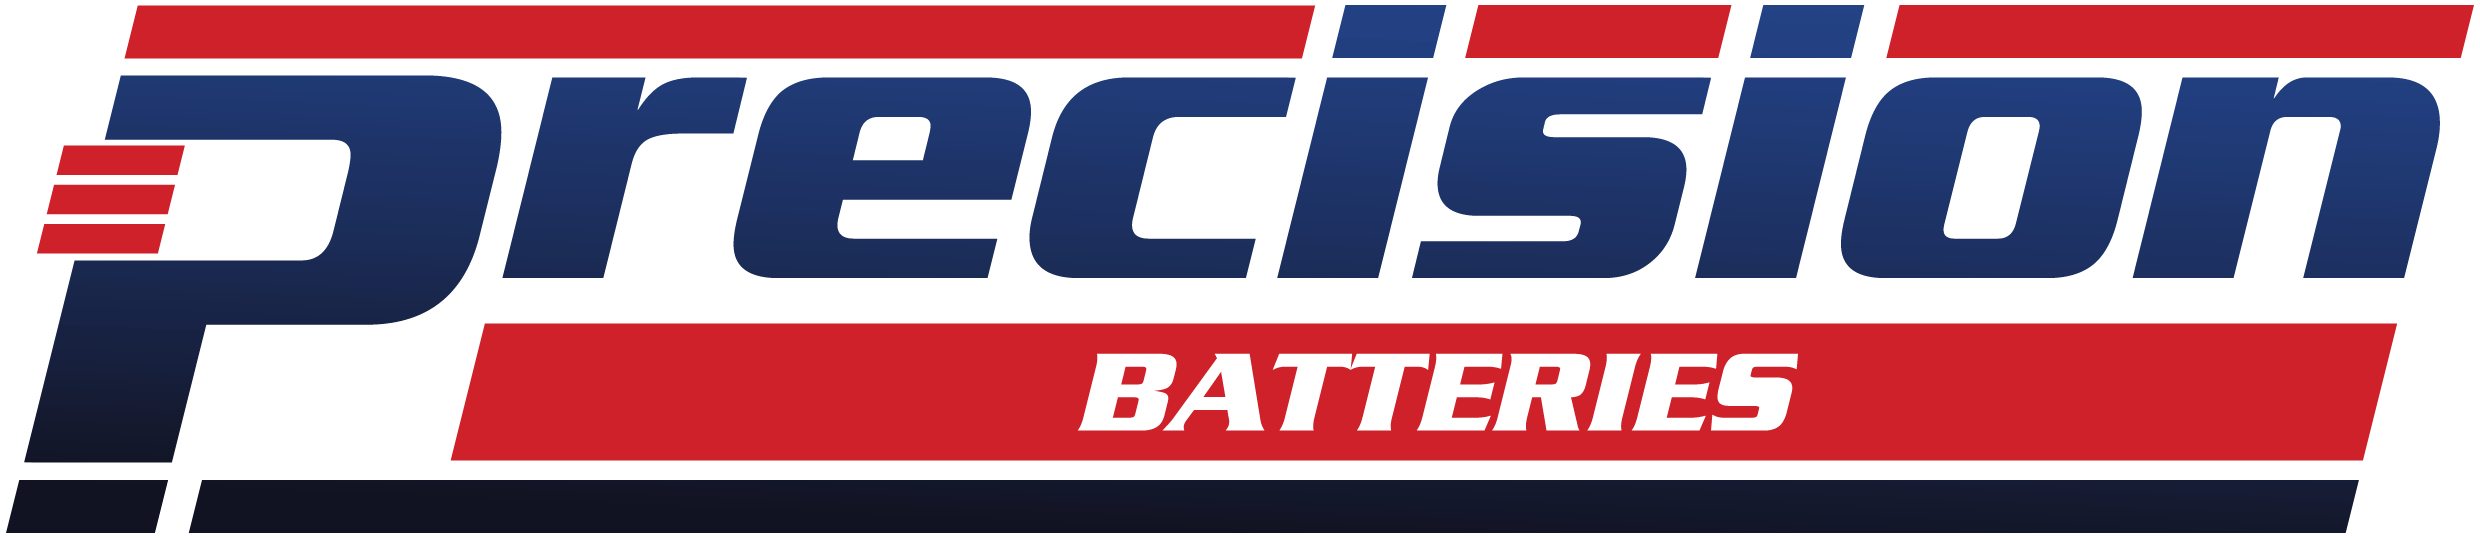 Batteries by Brand  Continental Battery Systems